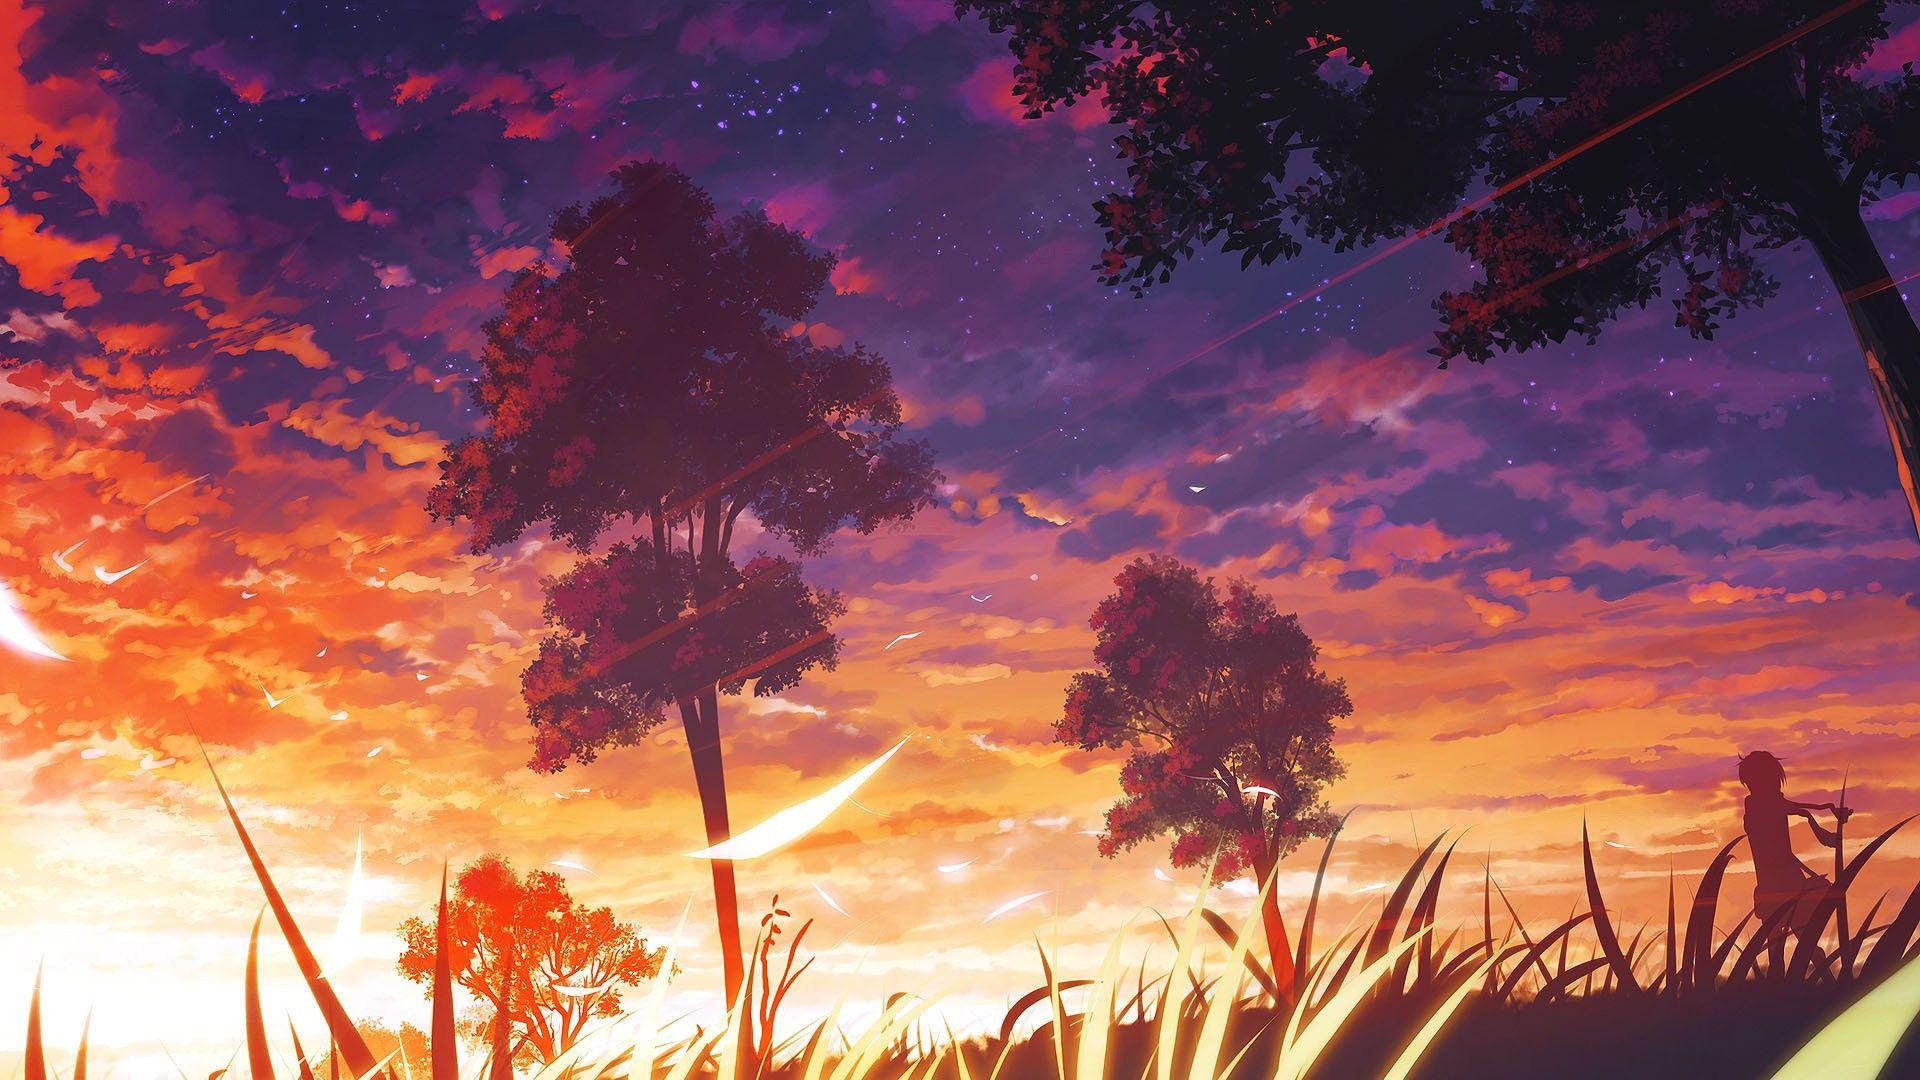 Download A cute anime profile picture with a gorgeous sunset backdrop!